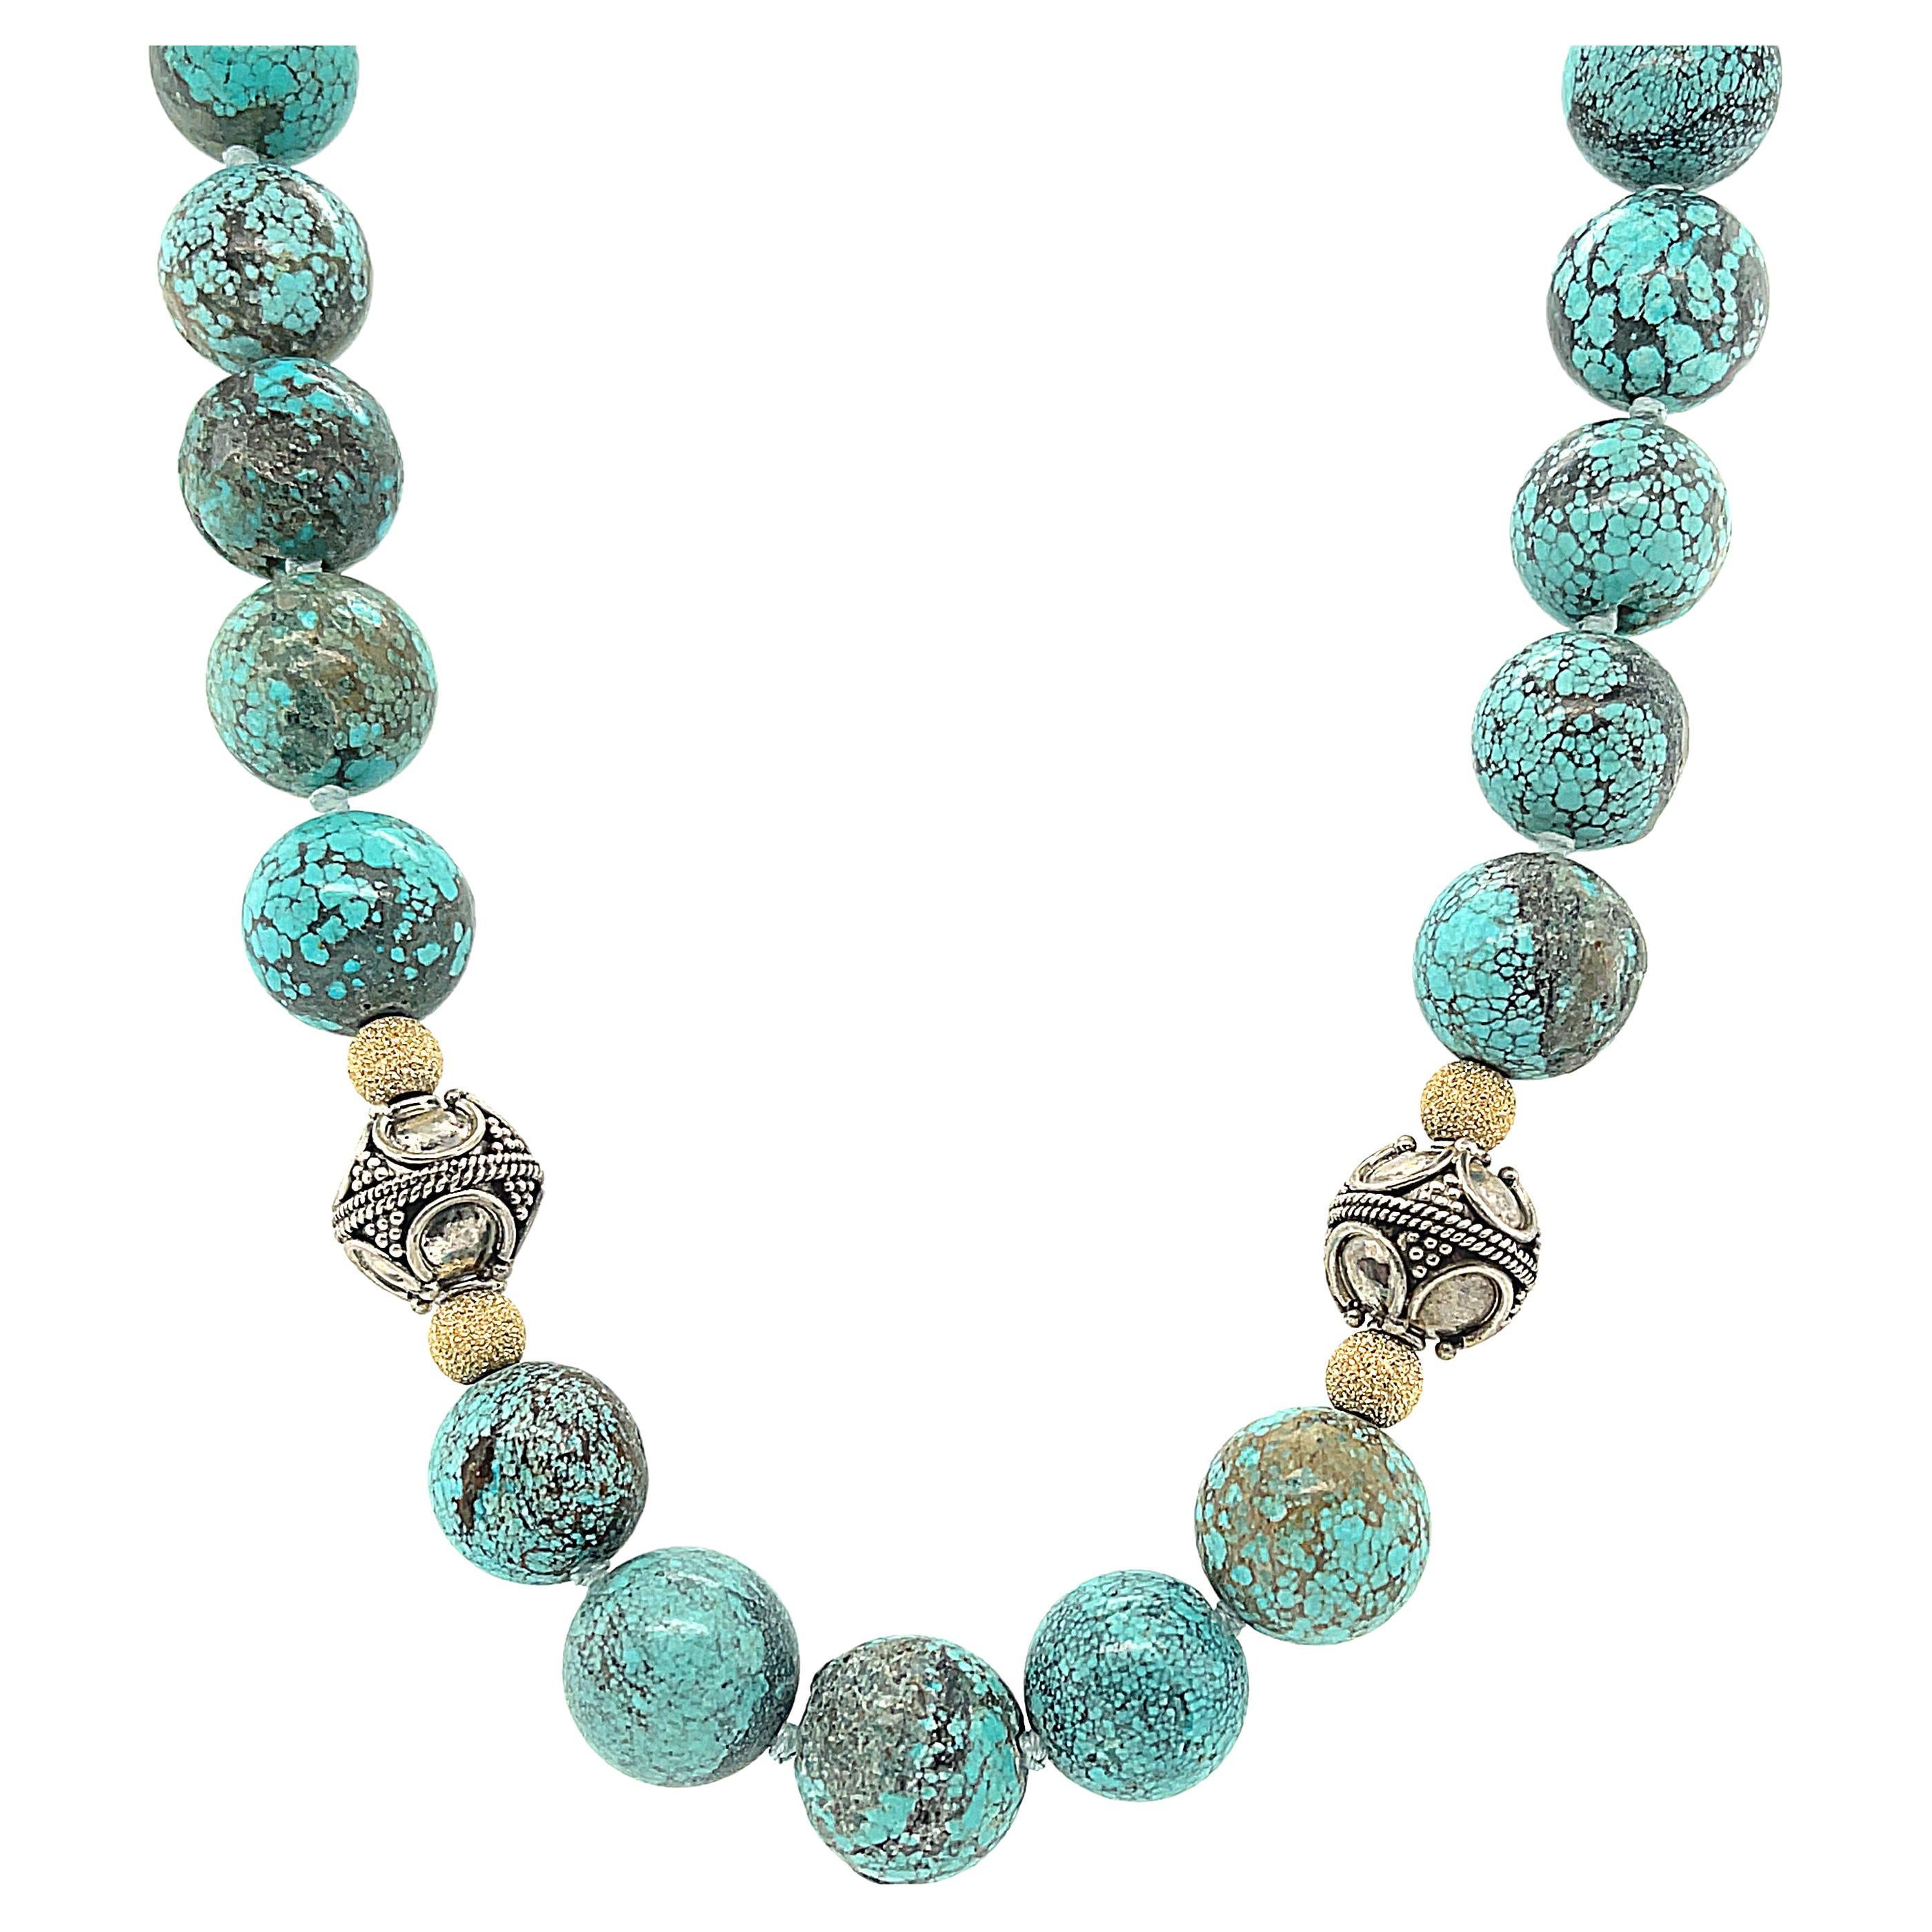 Spiderweb Turquoise Beaded Necklace with 14k Gold and Sterling Silver  Accents